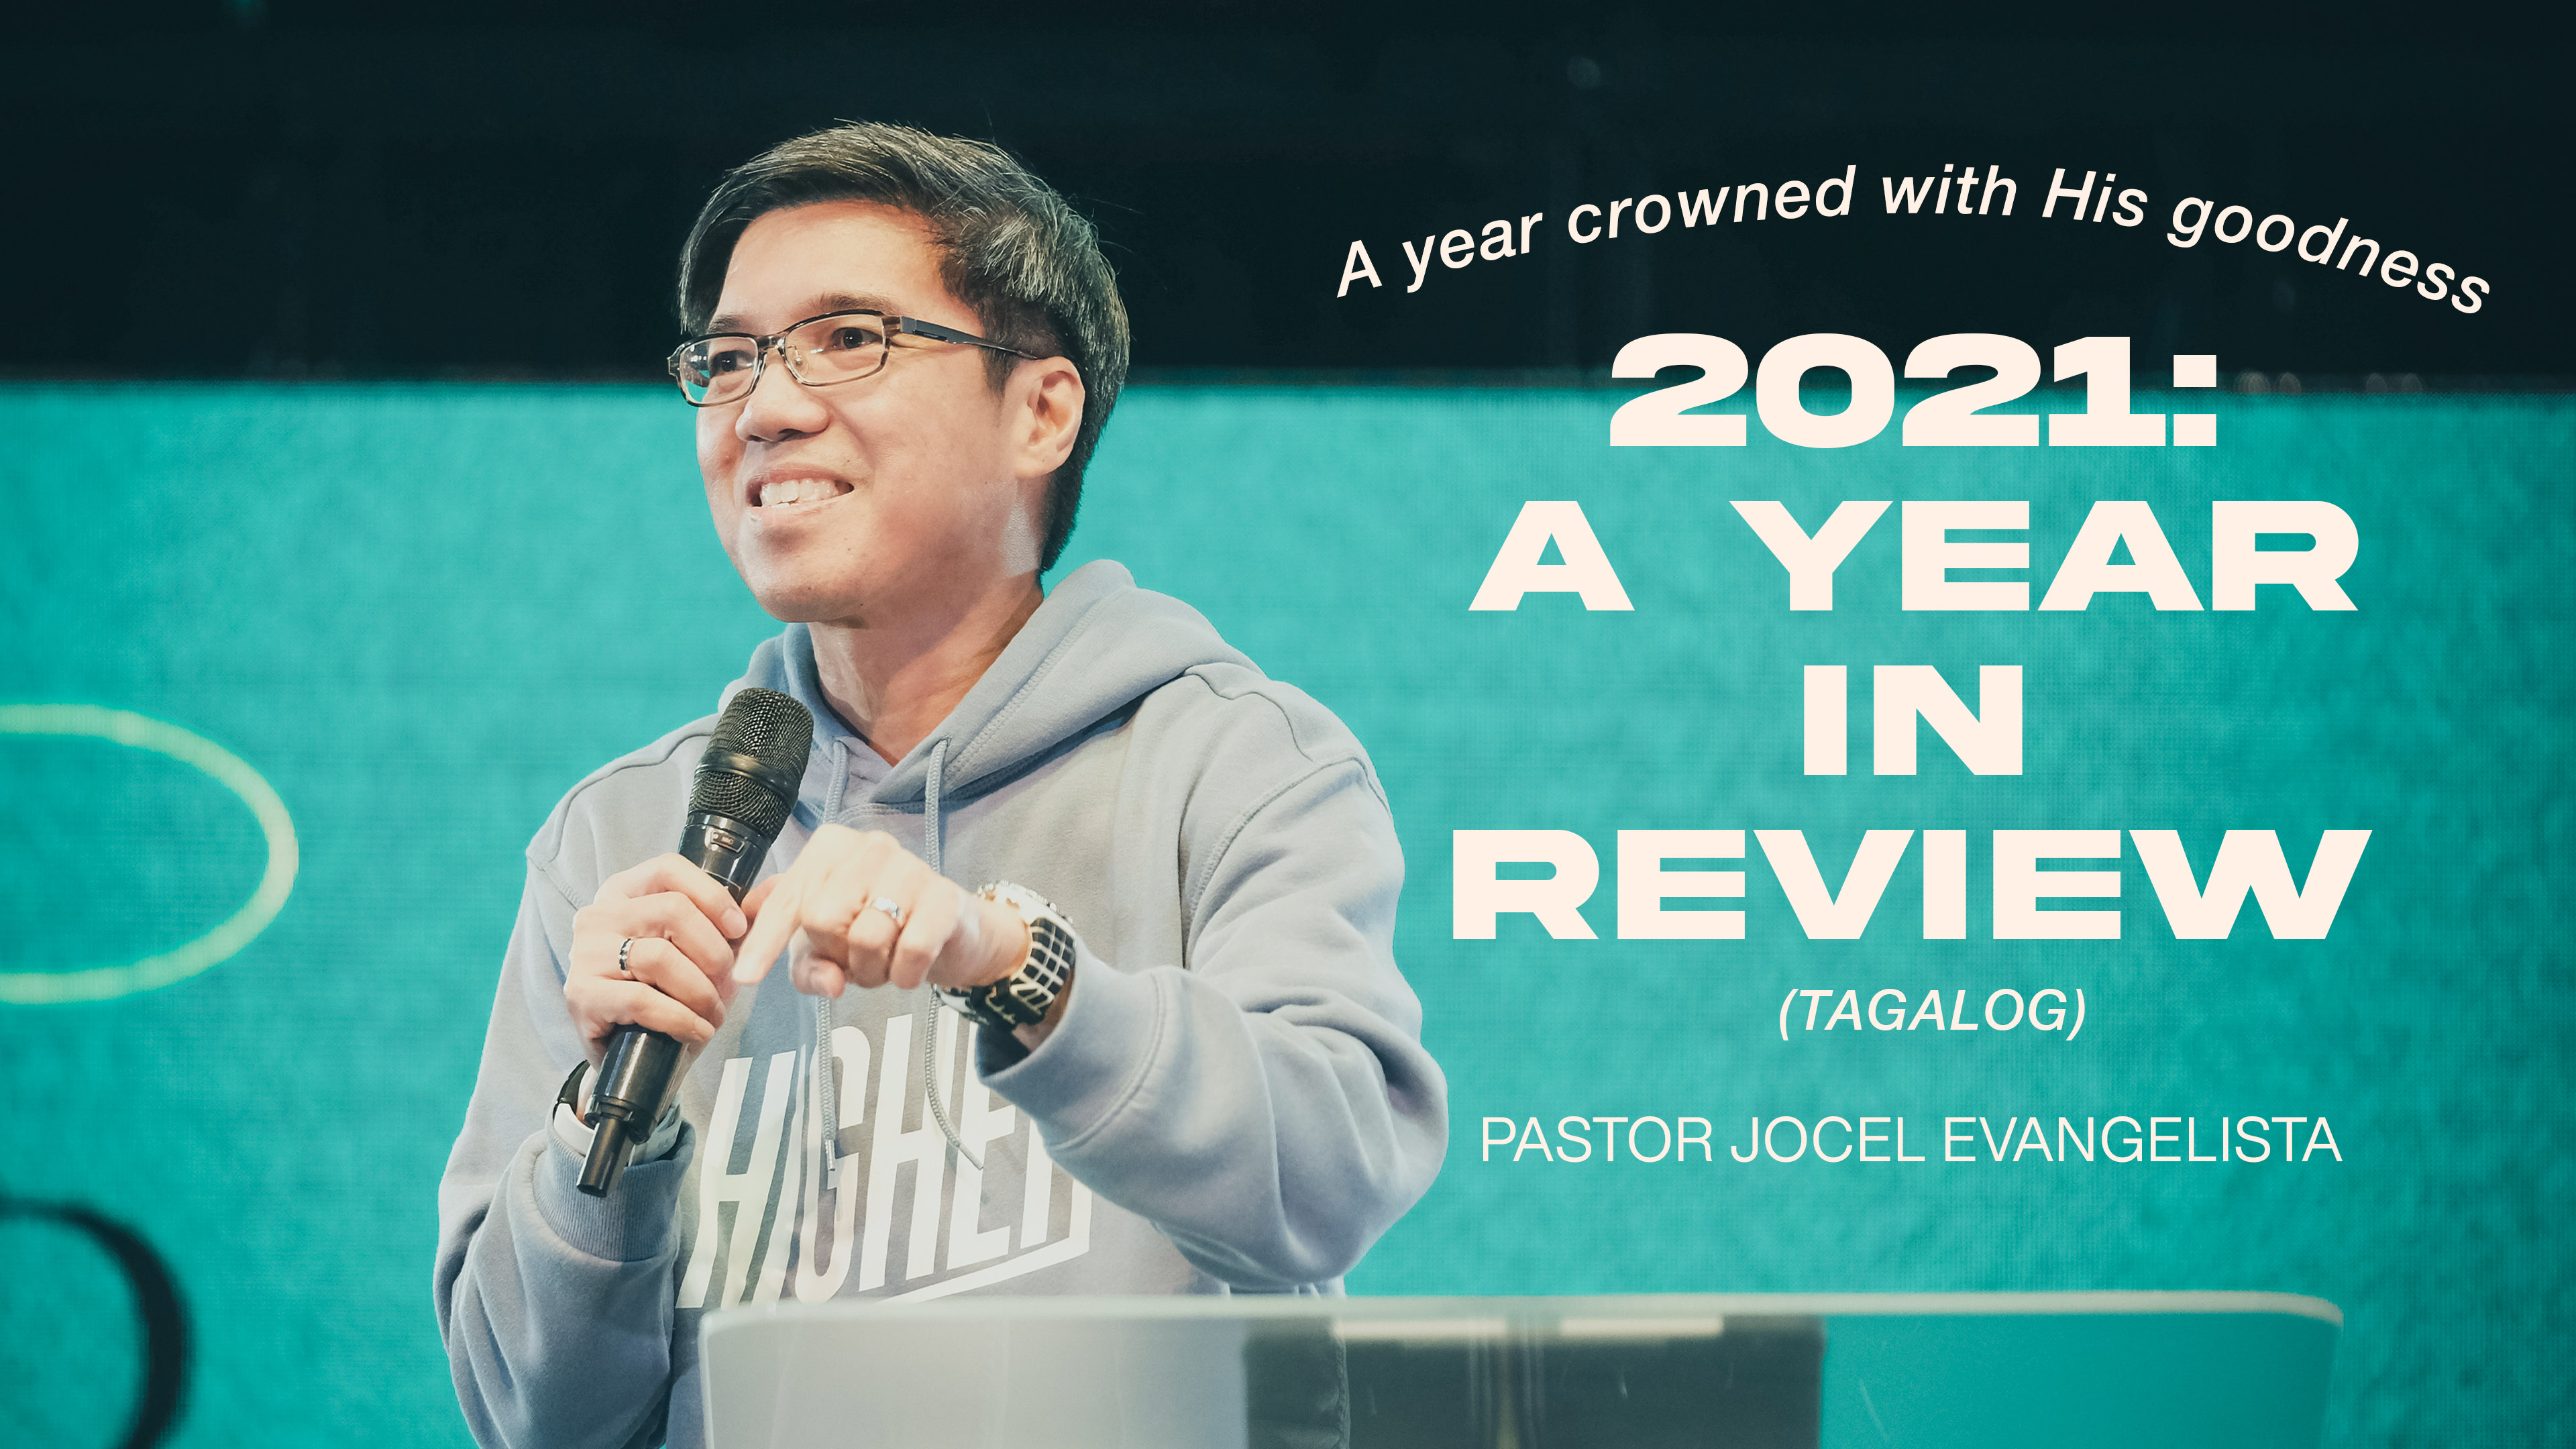 A YEAR CROWNED WITH HIS GOODNESS 2021: A YEAR IN REVIEW Image